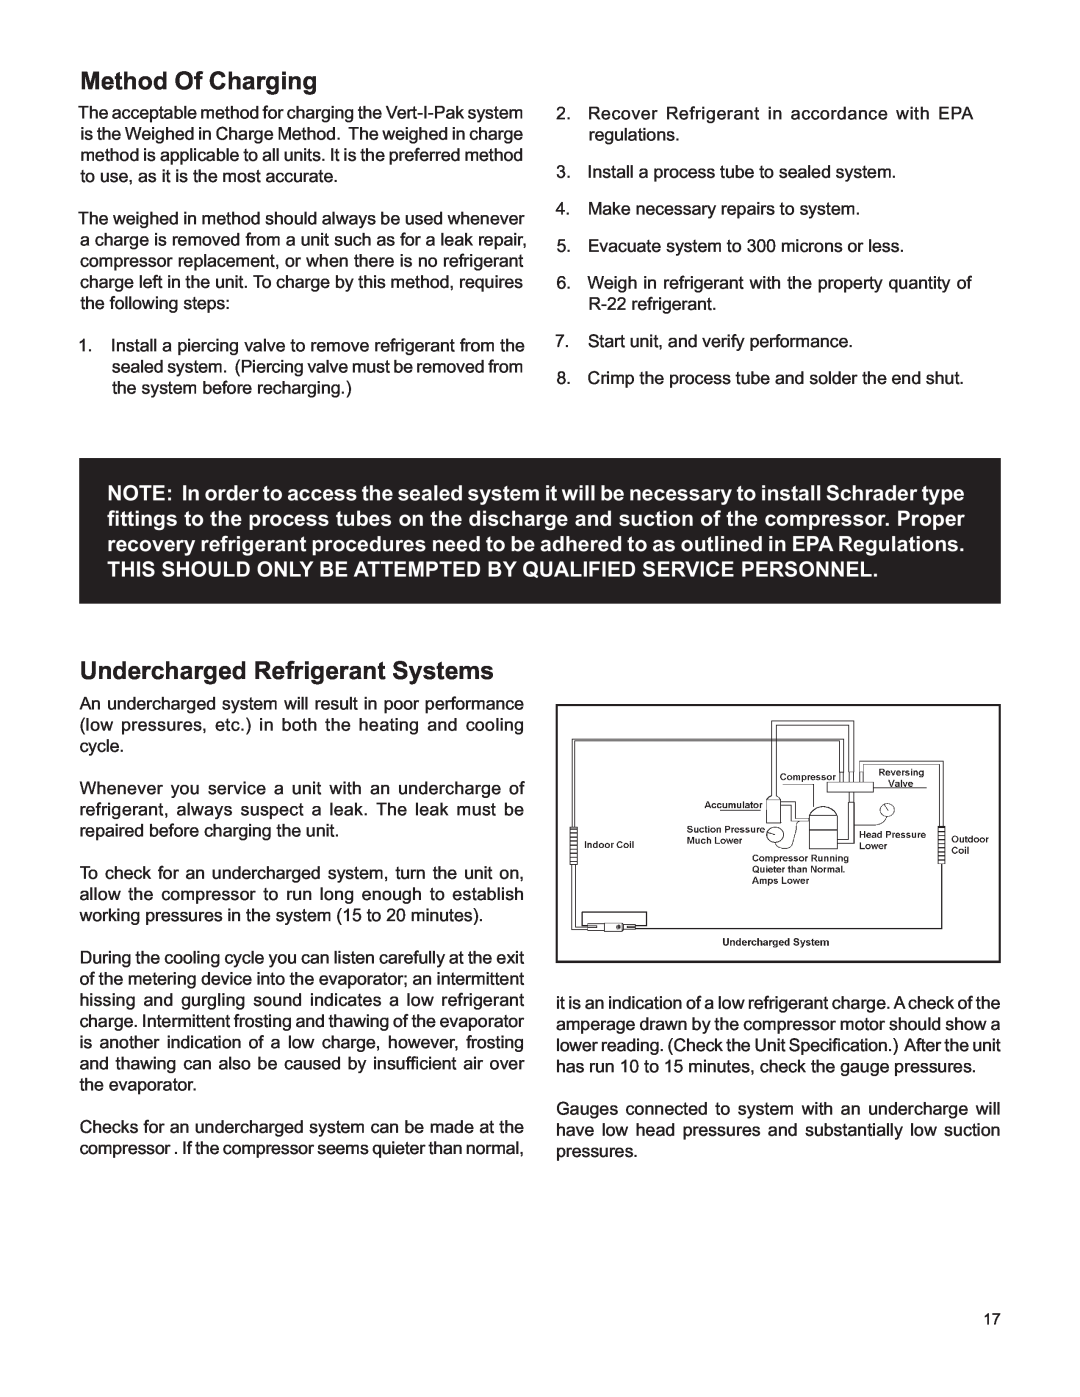 Friedrich V(E, H)A09K25 service manual Method Of Charging, Undercharged Refrigerant Systems 